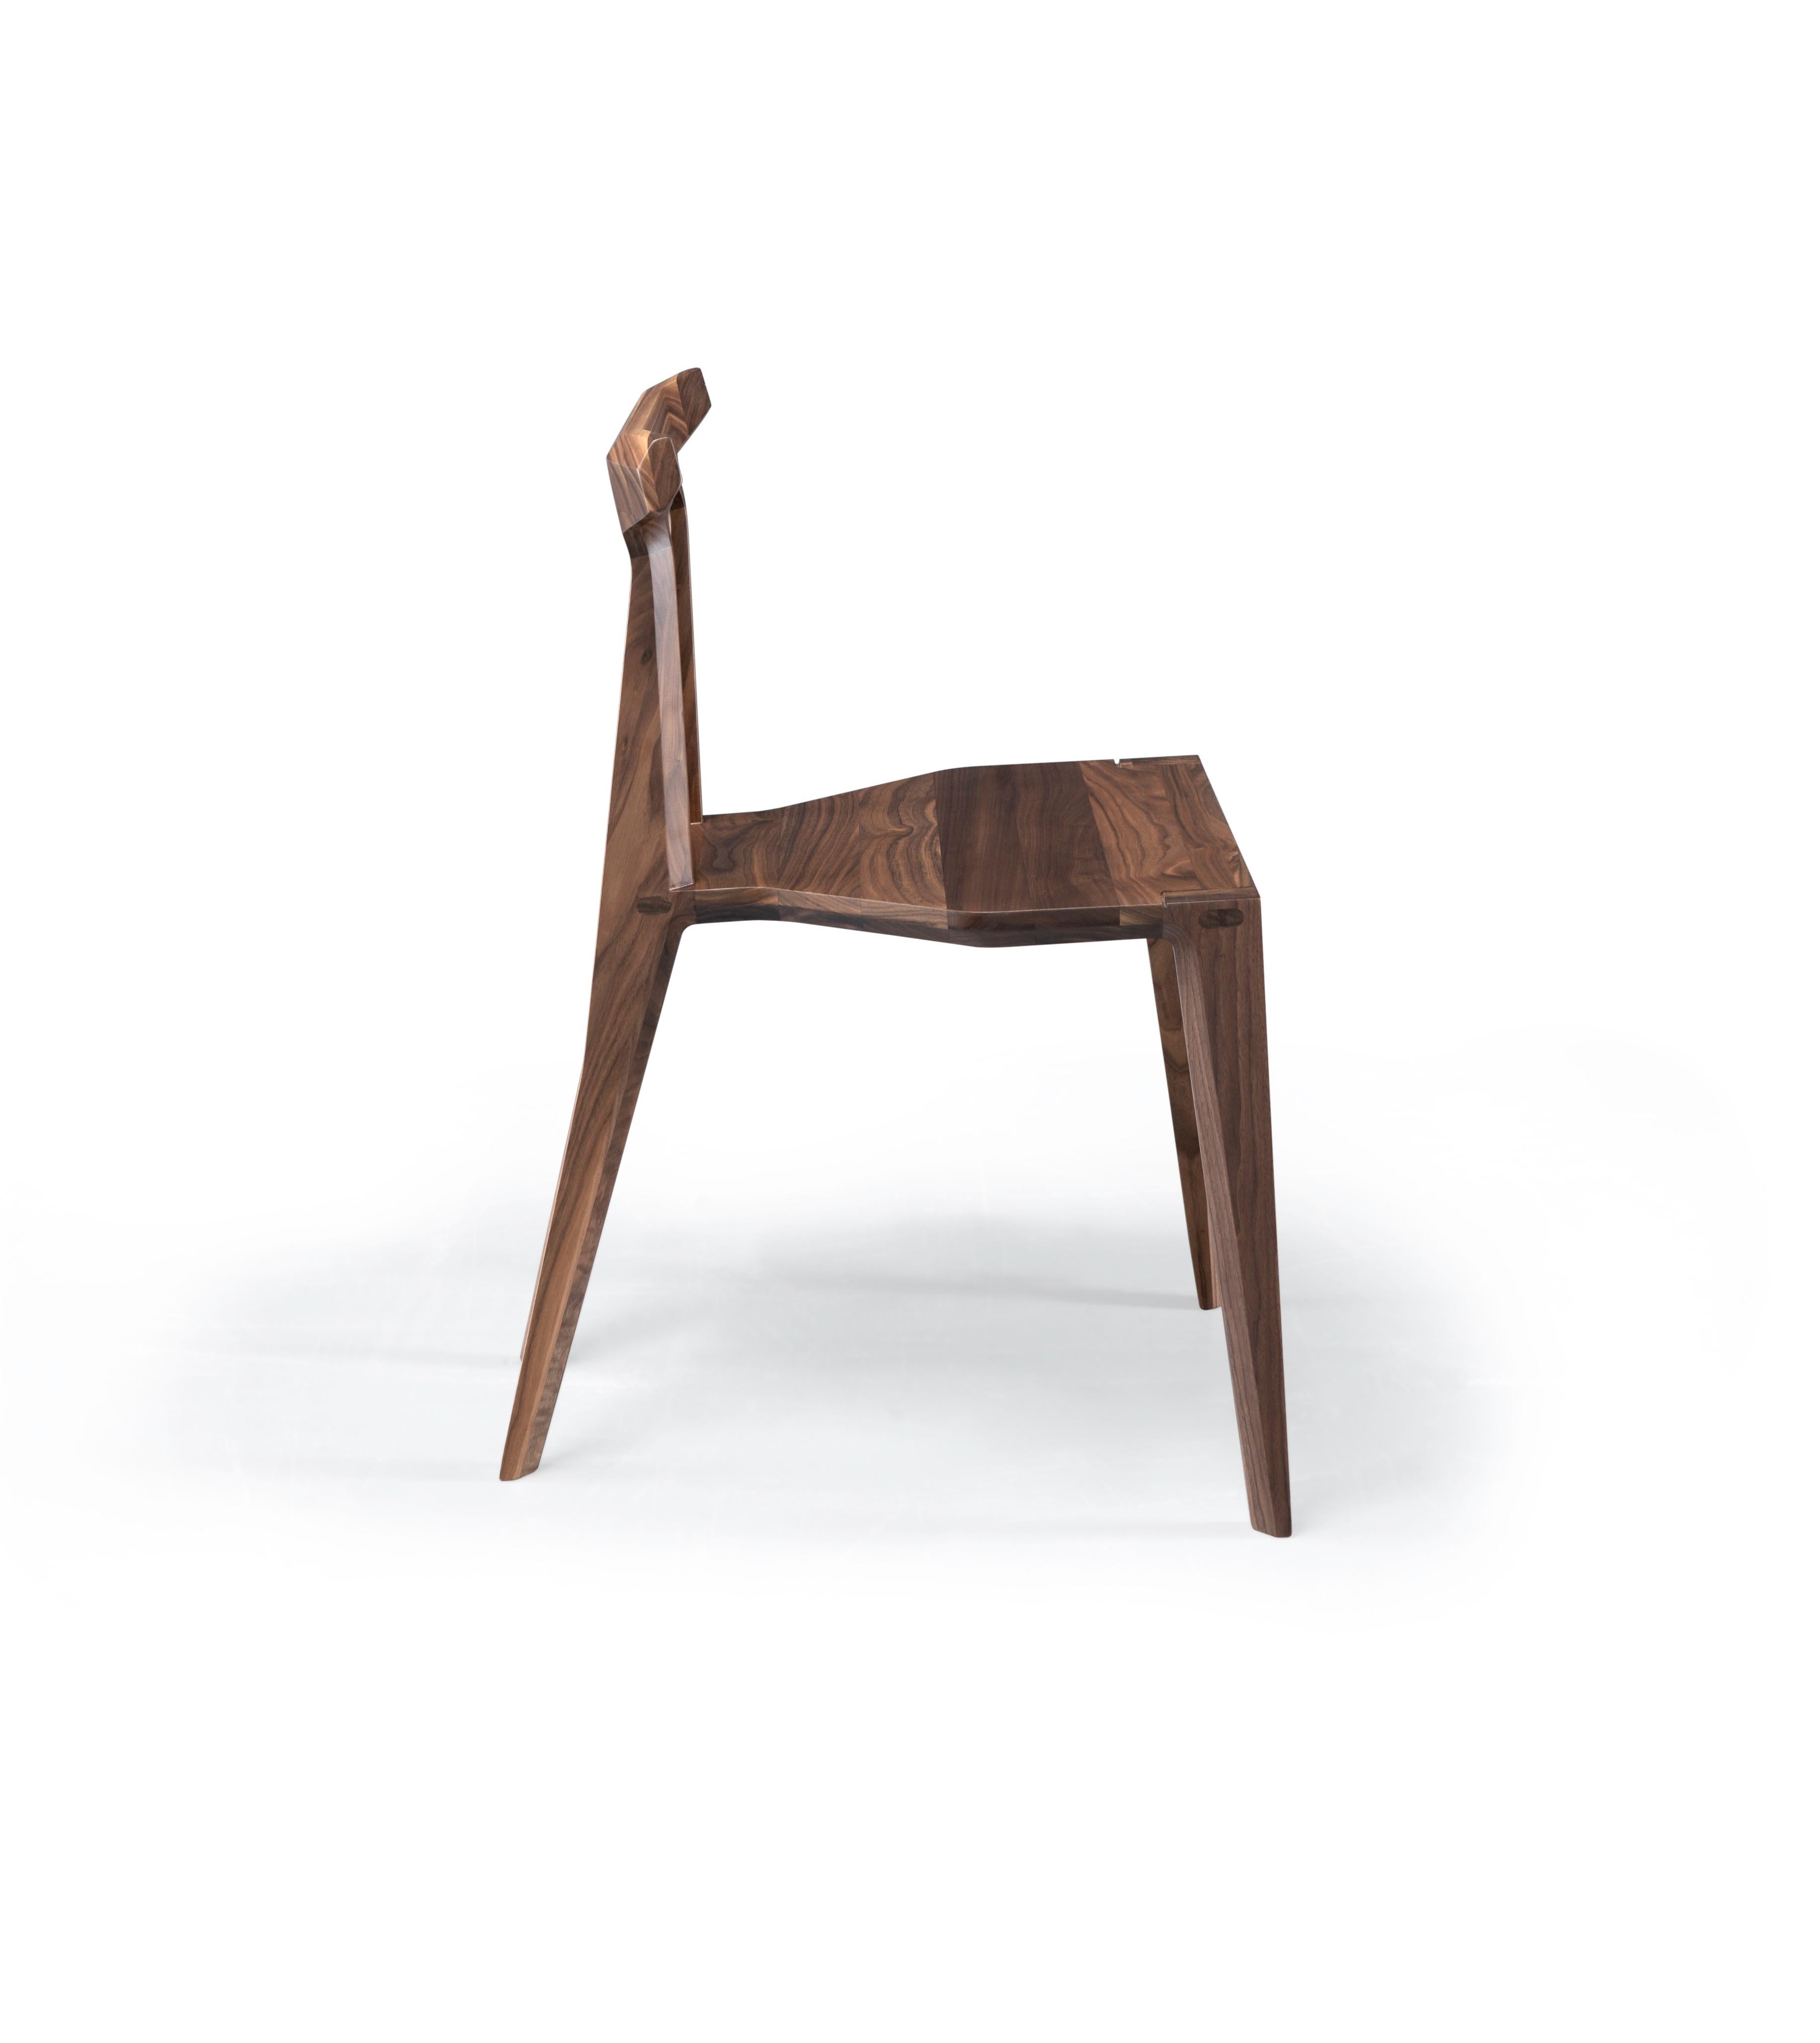 A stunning beautiful Nordic style chair all in wood, strong and light that enhances every room.
Available in oak or walnut and with upholstered seat pad.
Assembled with no screws or metal fittings.
Packed in a plywood box.
Priced by one.